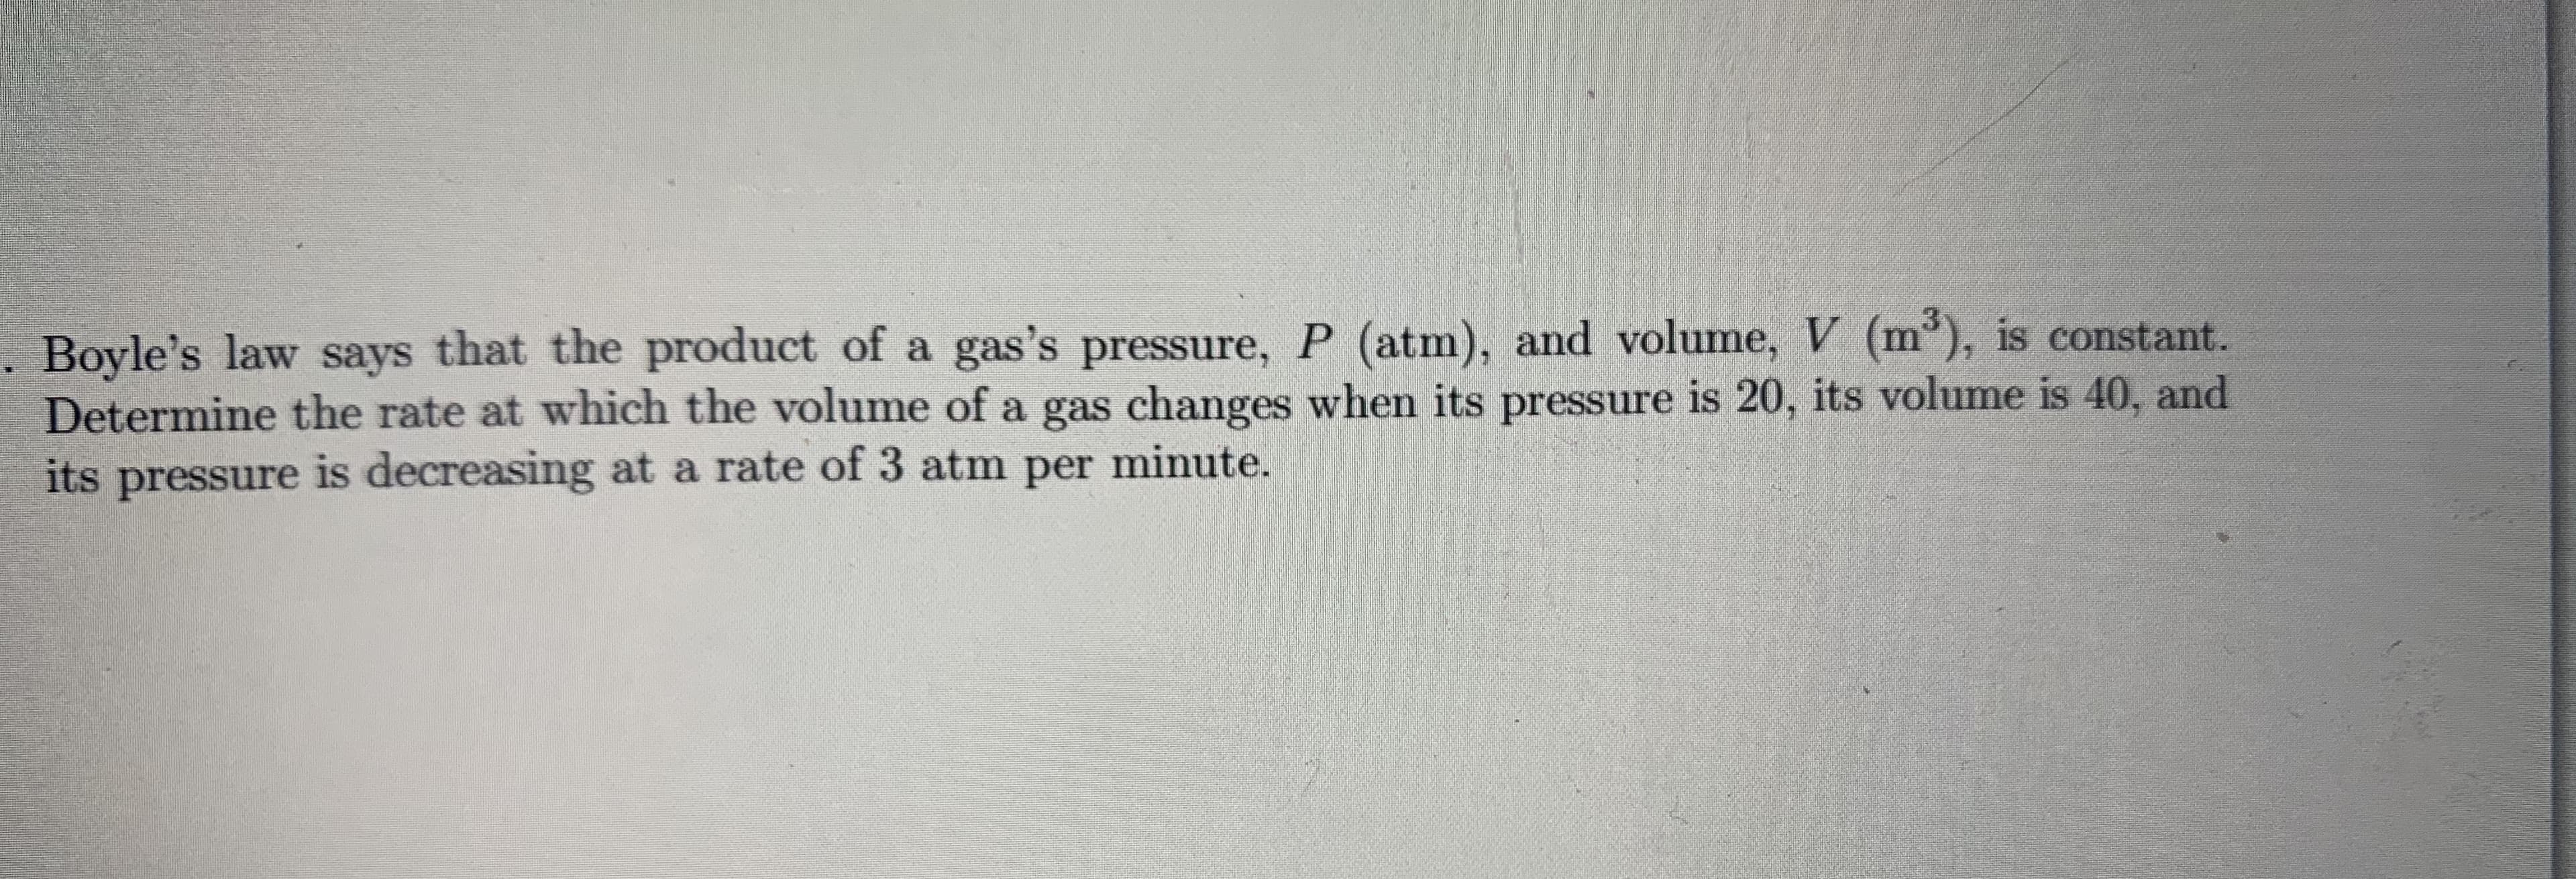 Boyle's law says that the product of a gas's pressure, P (atm), and volume, V (m'), is constant.
Determine the rate at which the volume of a gas changes when its pressure is 20, its volume is 40, and
its pressure is decreasing at a rate of 3 atm per minute.
